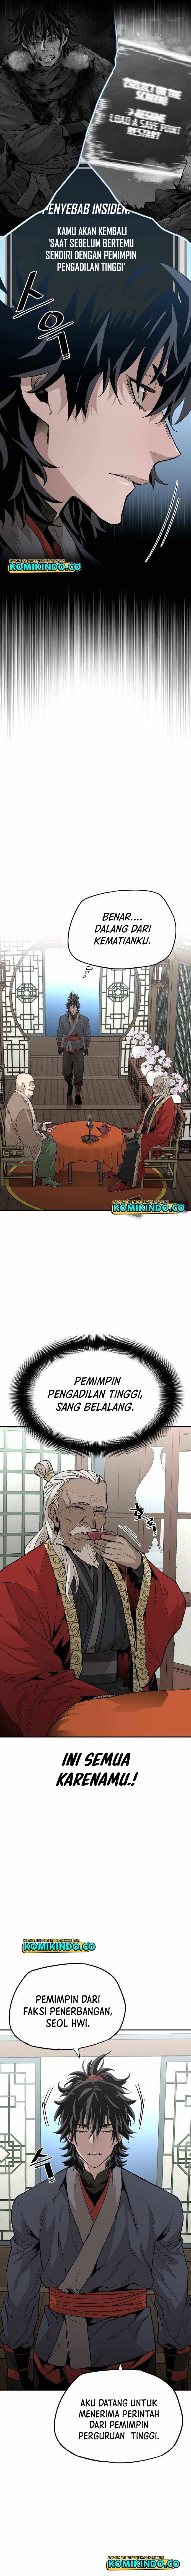 Heavenly Demon Cultivation Simulation Chapter 1 fix